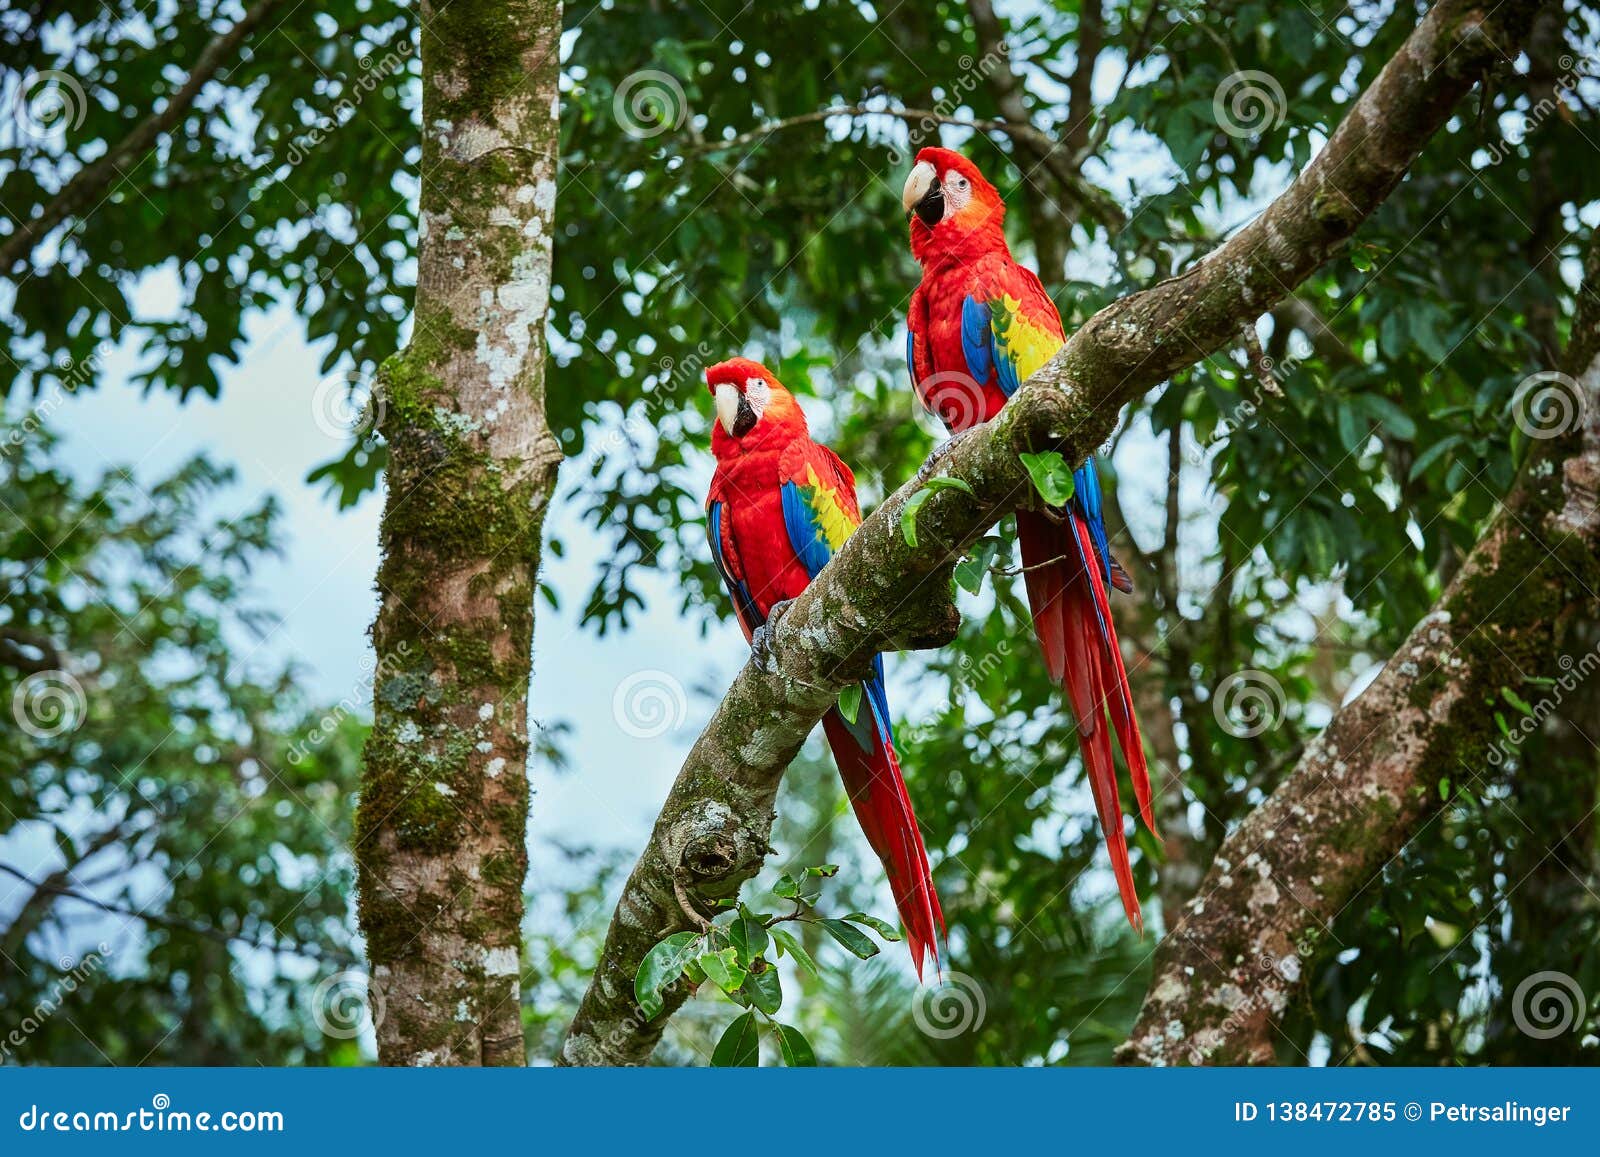 pair of big scarlet macaws, ara macao, two birds sitting on the branch. pair of macaw parrots in costa rica.